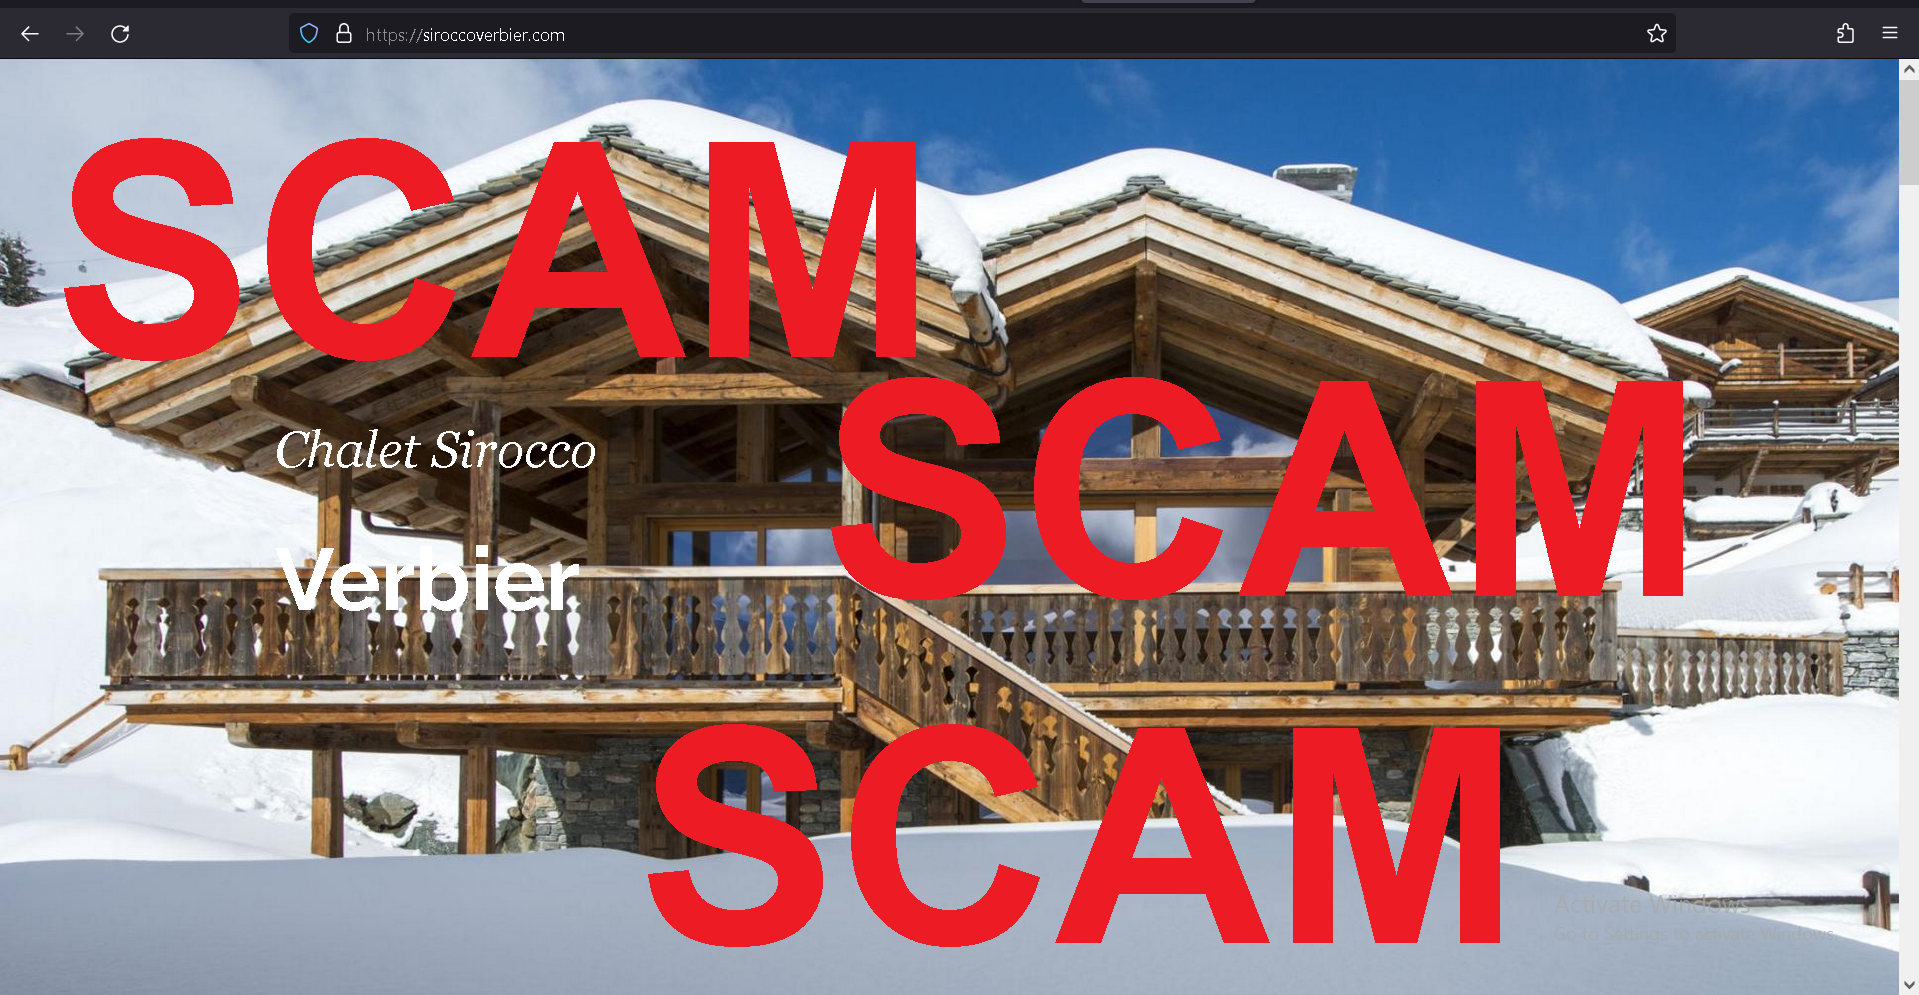 You are currently viewing Fraudulent website: siroccoverbier.com SCAM SCAM